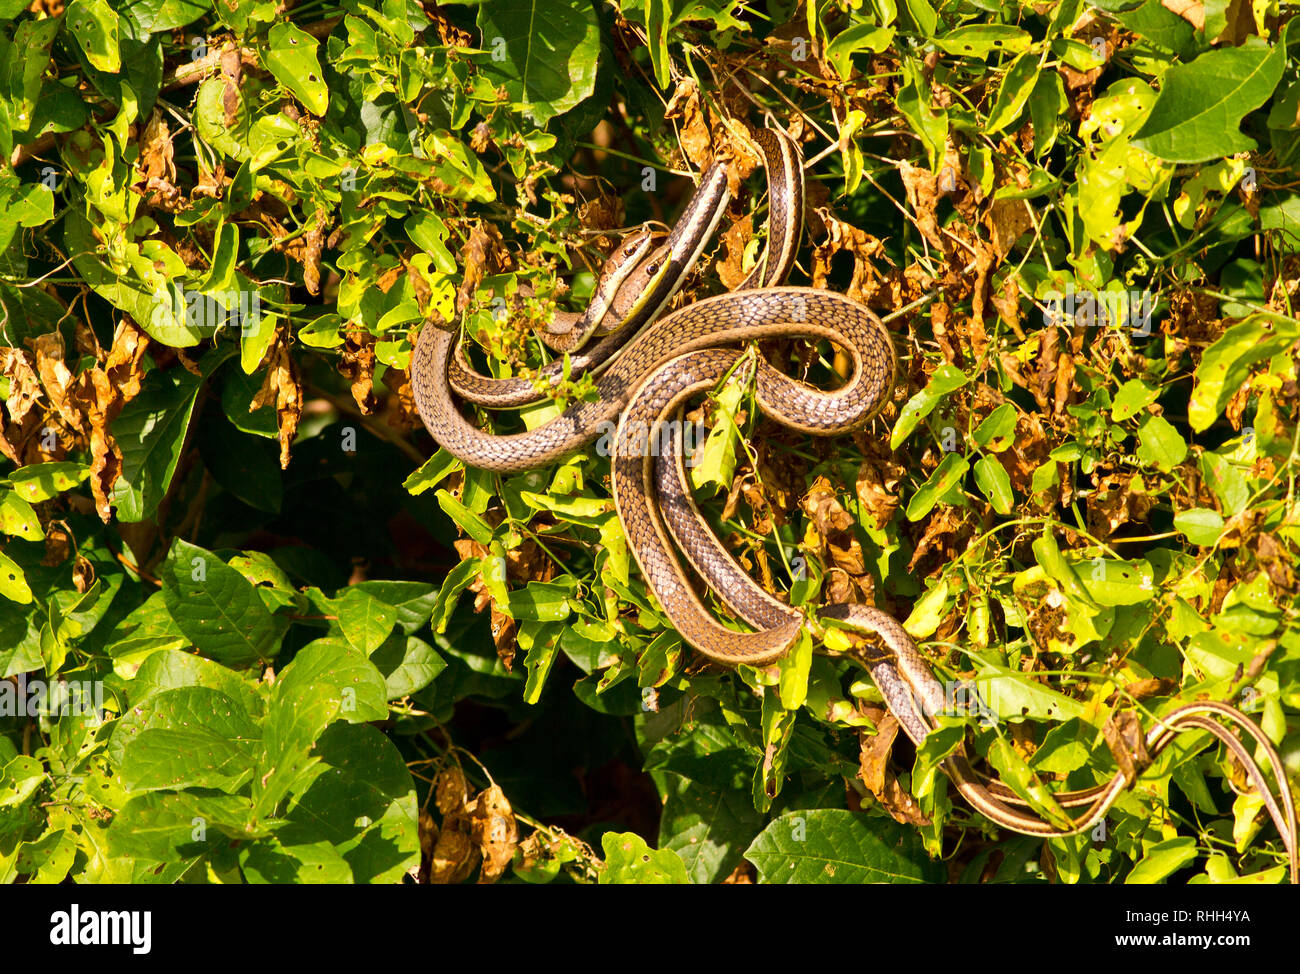 The courtship and mating of many species of snakes can be a proteracted affair. Here a pair of Northern Striped Sand Snakes are mating Stock Photo